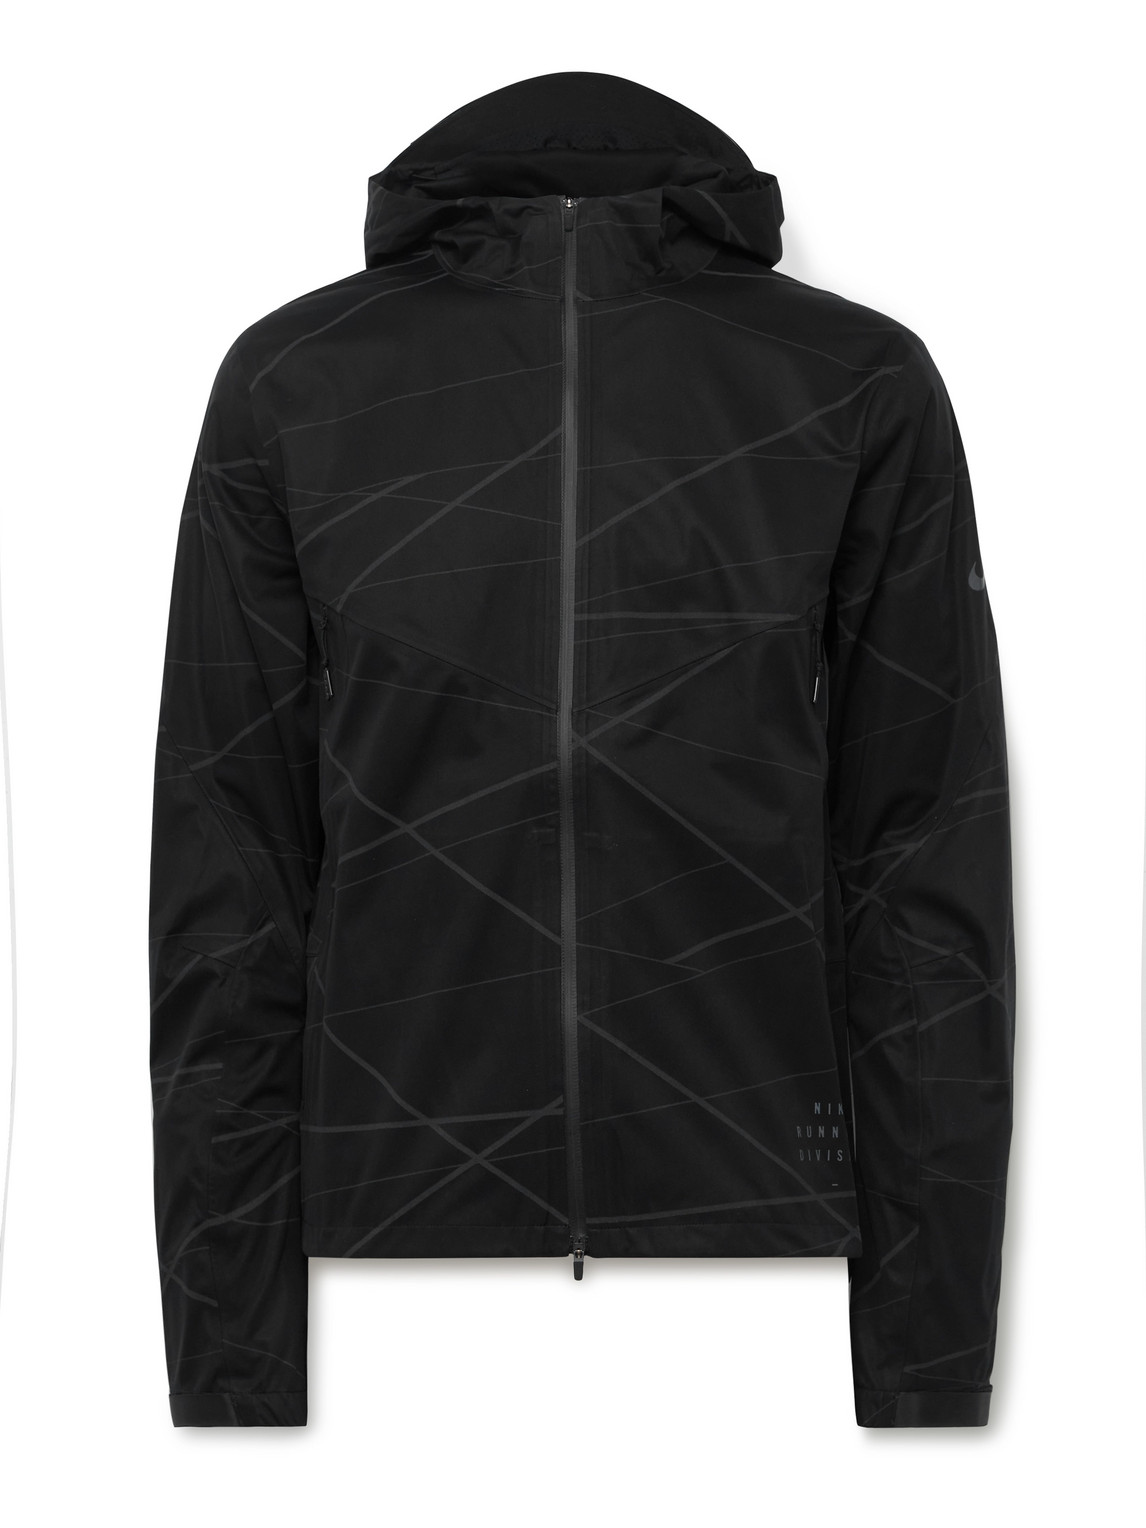 Nike Running Run Division Printed Storm-FIT Hooded Jacket